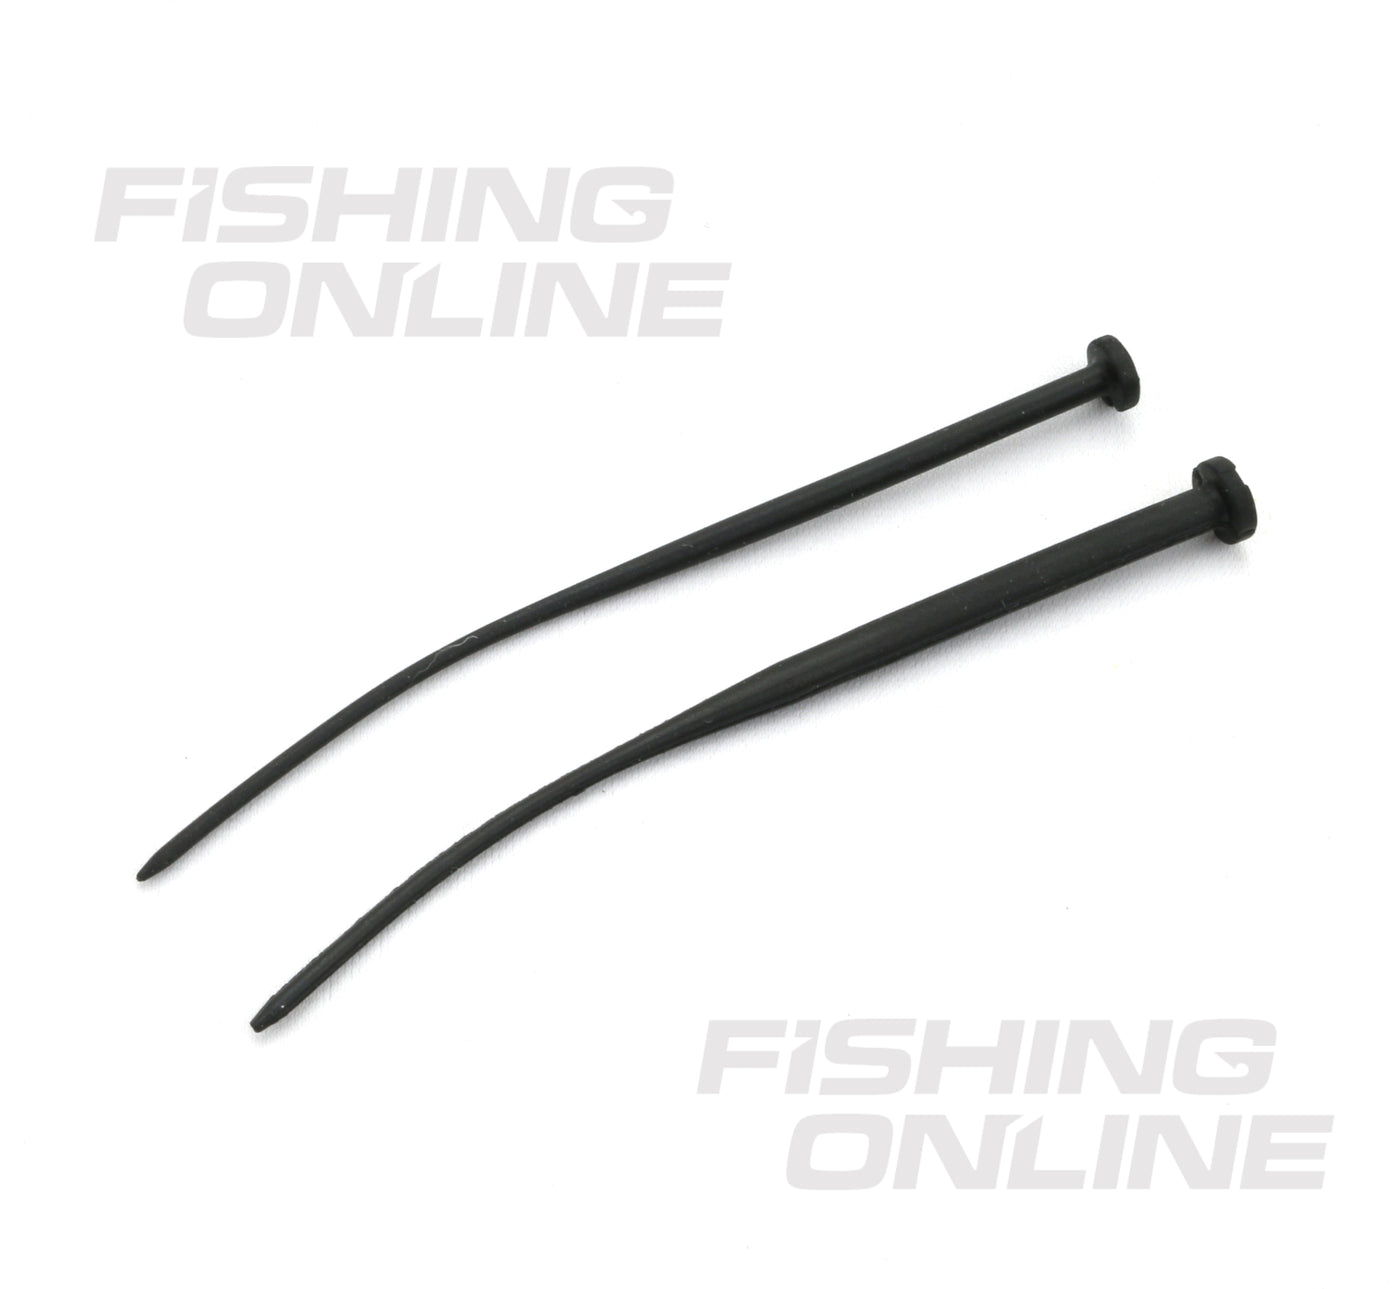 Fishing Terminal Tackles Peg Weight Stoppers Sinker /Bobber Stops